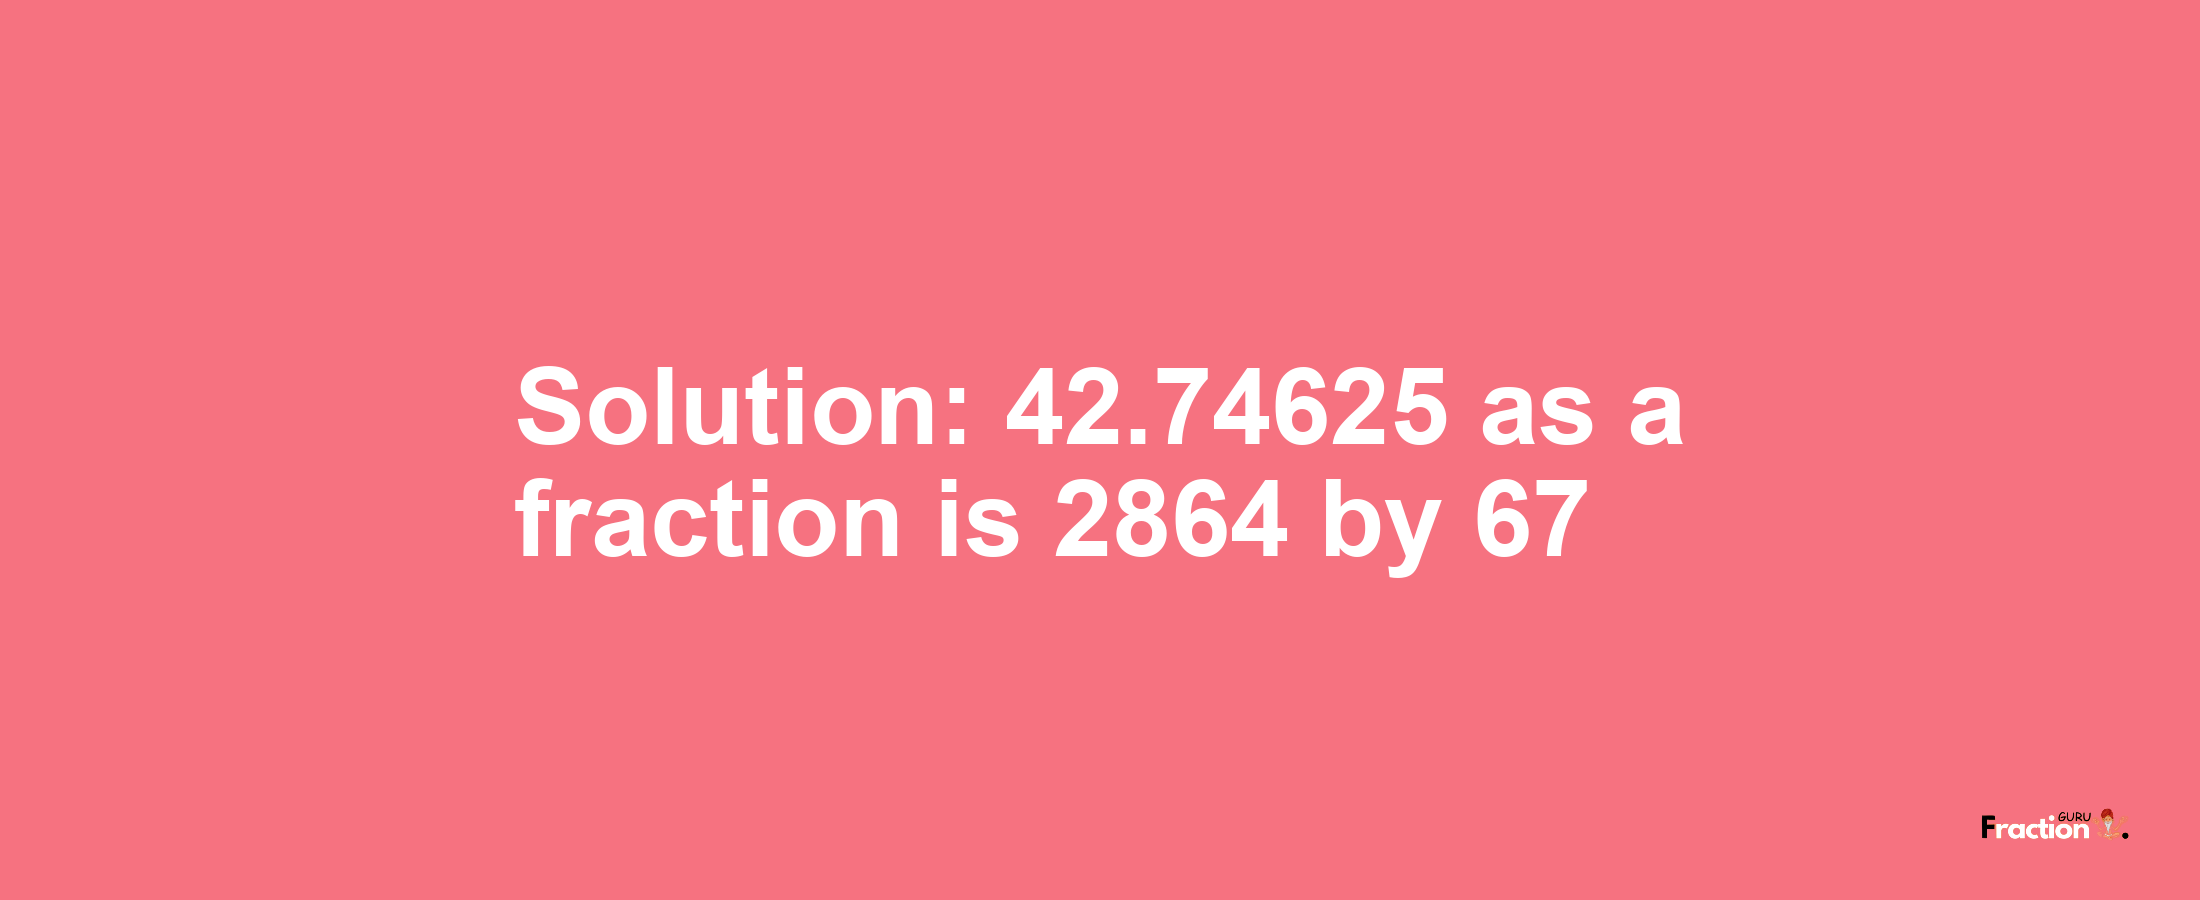 Solution:42.74625 as a fraction is 2864/67